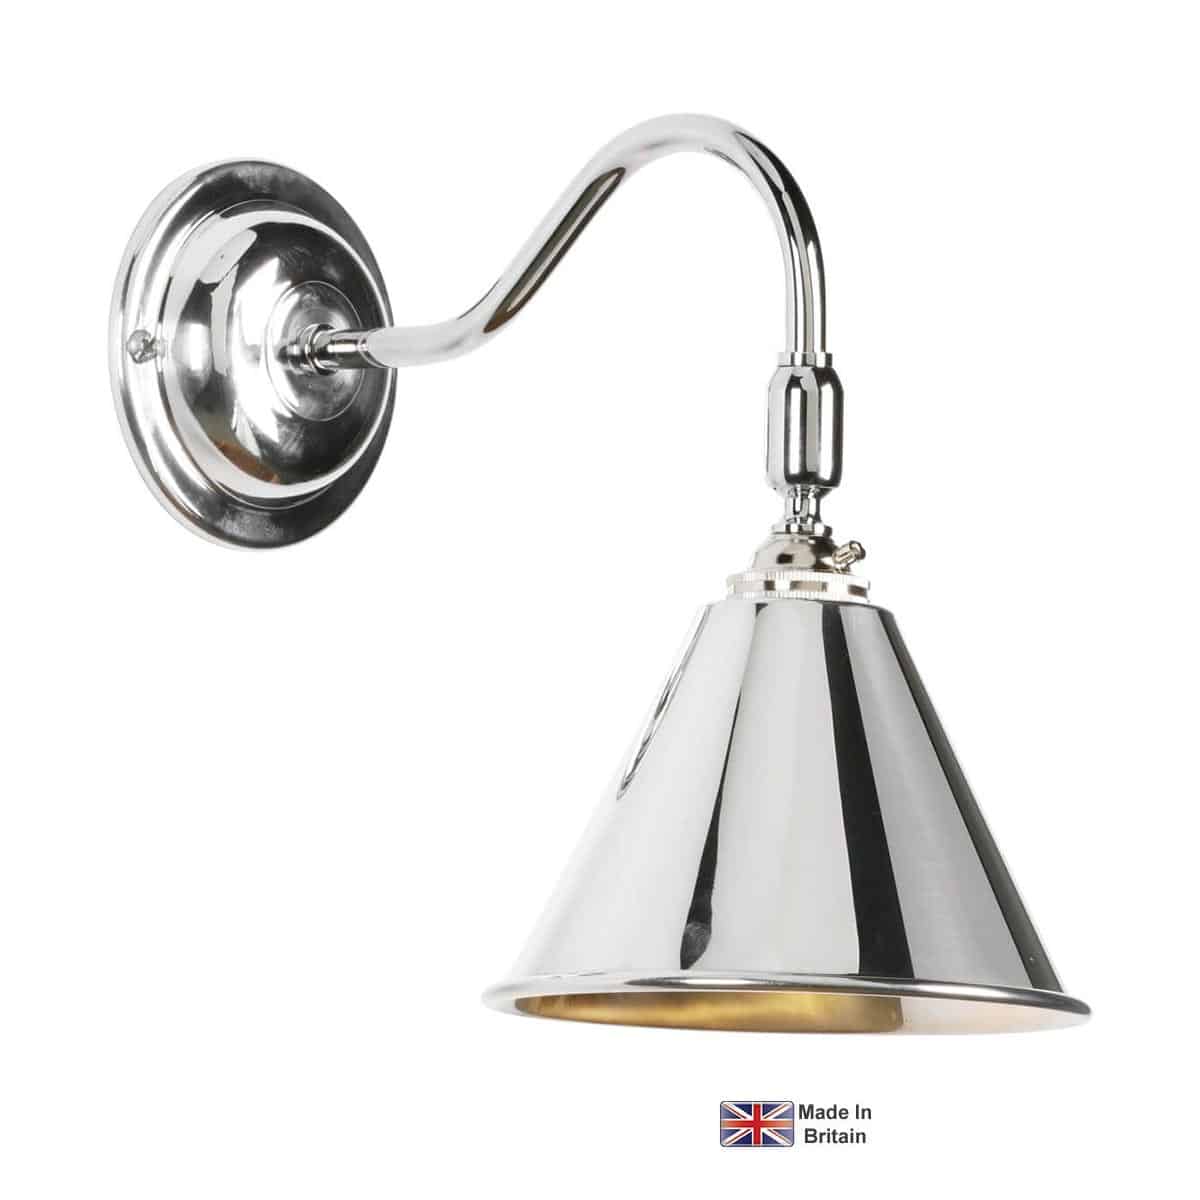 London Adjustable Wall Light Chrome Plated Solid Brass